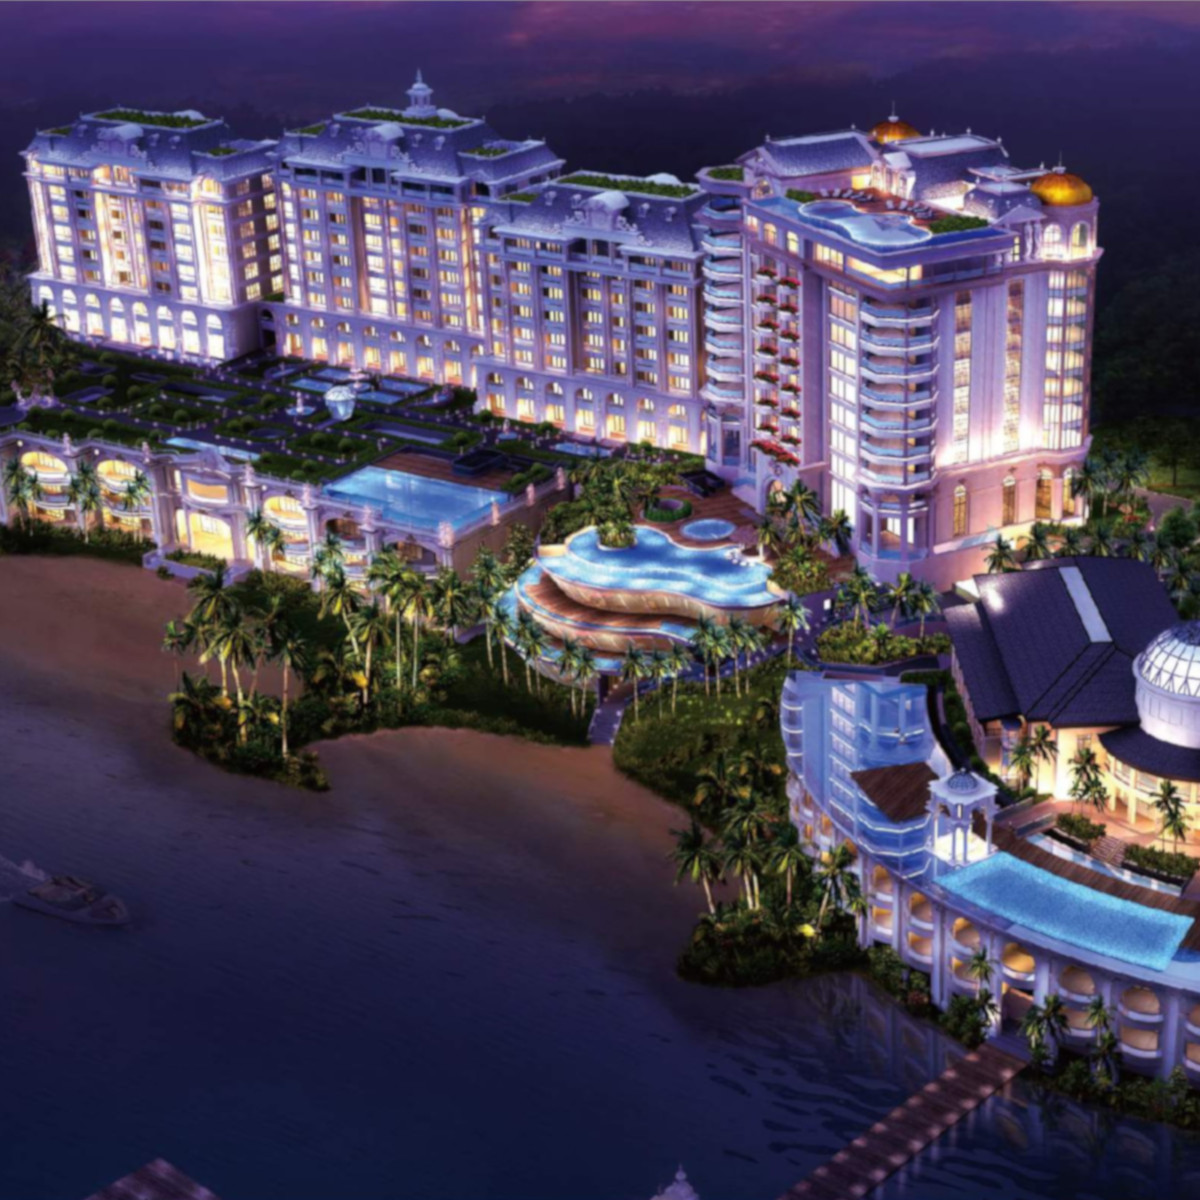 TRIBOA MAJESTIC BAY - the Ultra-high residential destination at Subic Bay - http://FLBFANG.COM